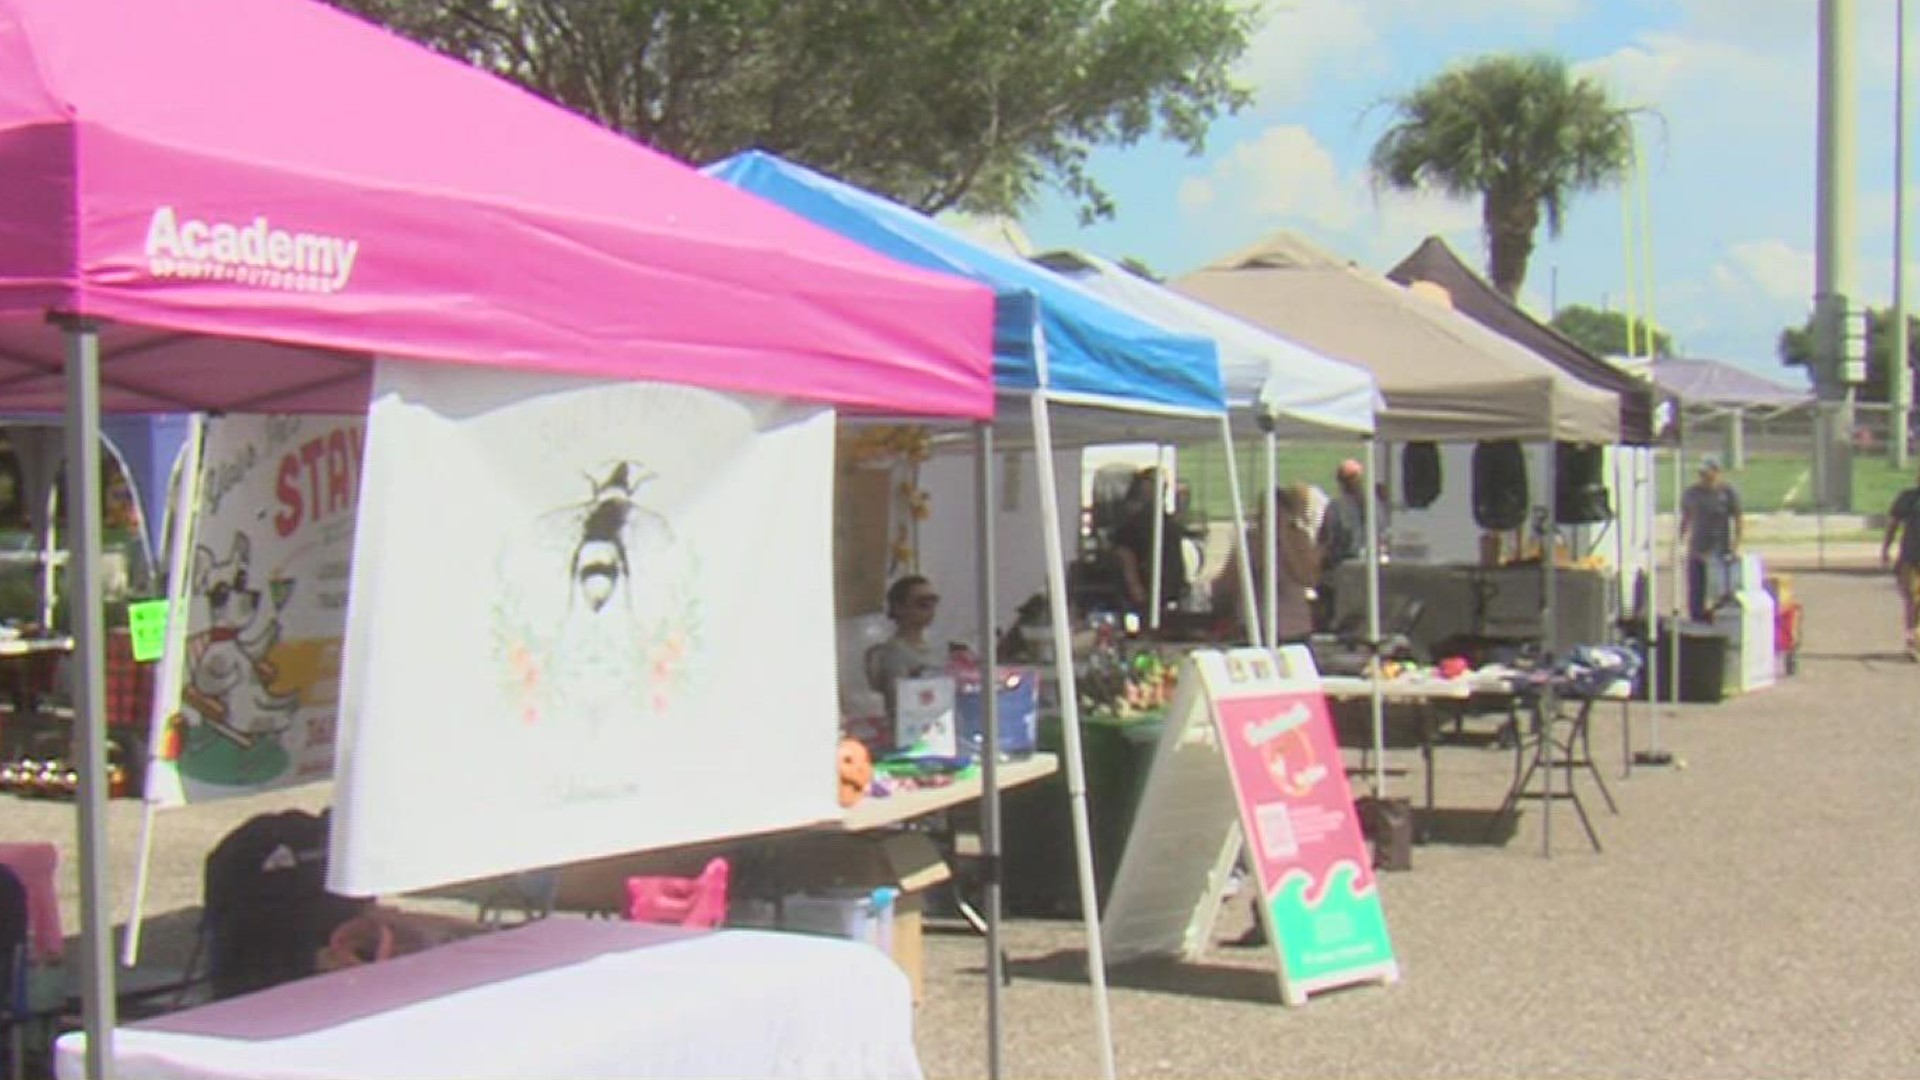 The event was held to help animals get adopted and taken into their forever homes.